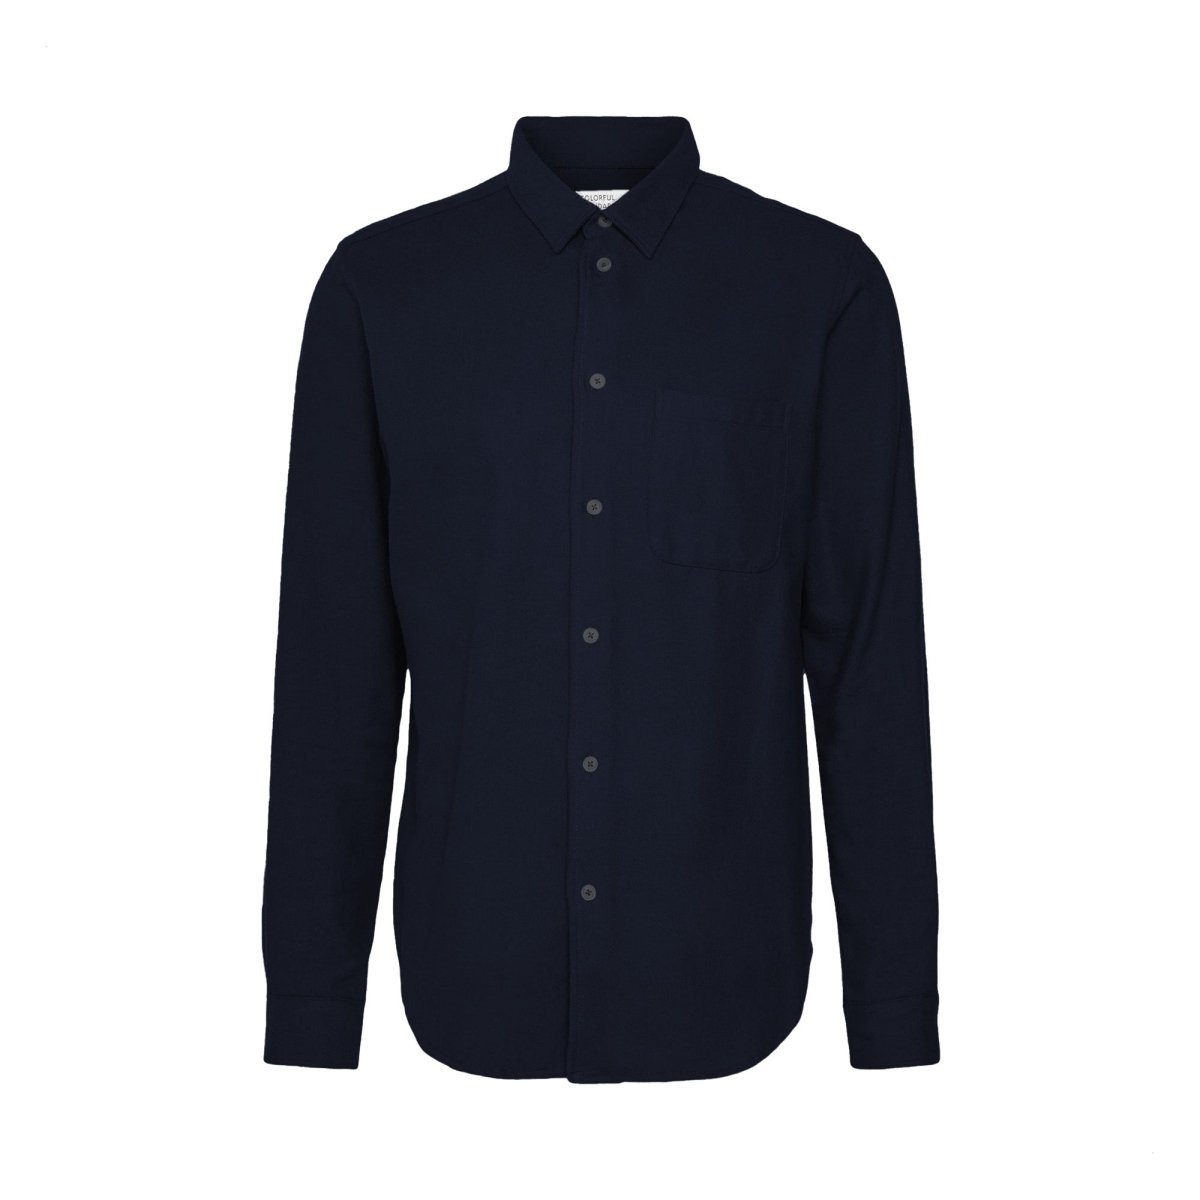 Colorful Flannel Shirt Navy Blue - KYOTO - Colorful Standard